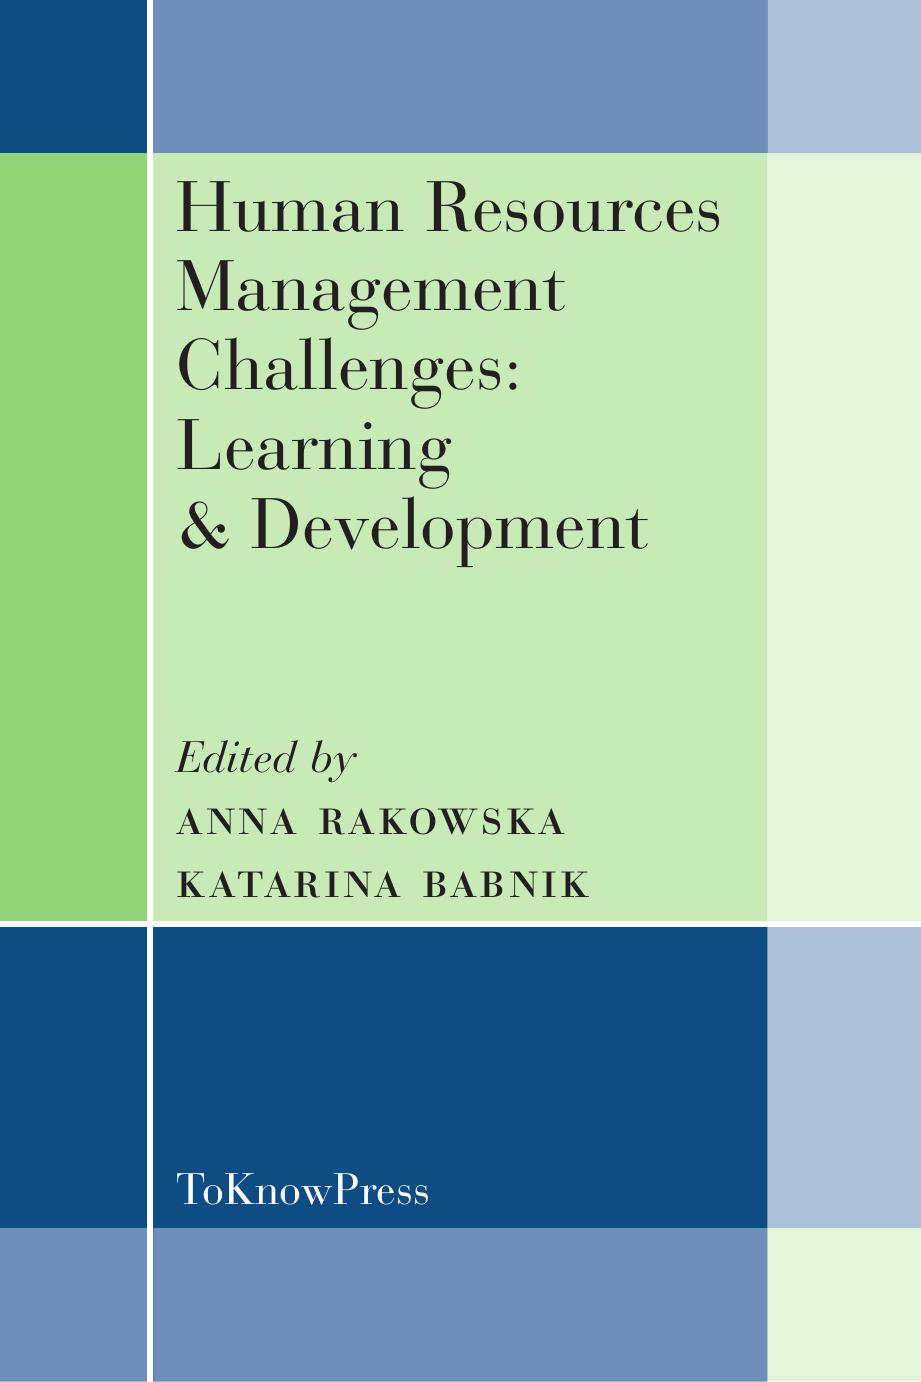 Human Resources Management Challenges: Learning & Development